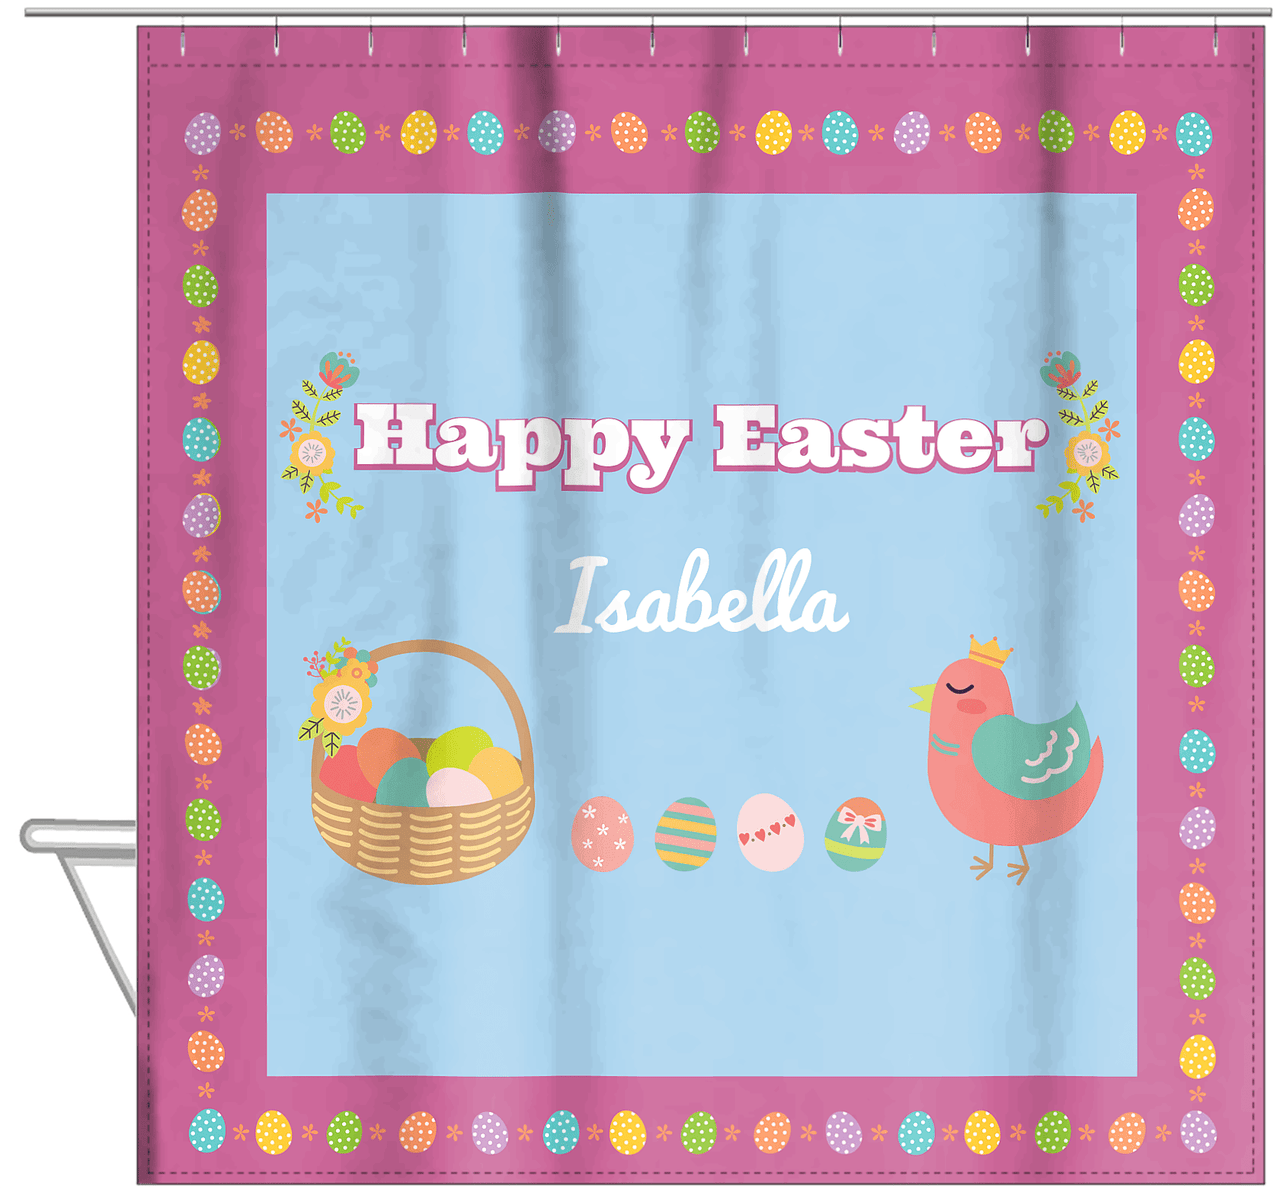 Personalized Easter Shower Curtain VII - Easter Eggs - Pink Background - Hanging View